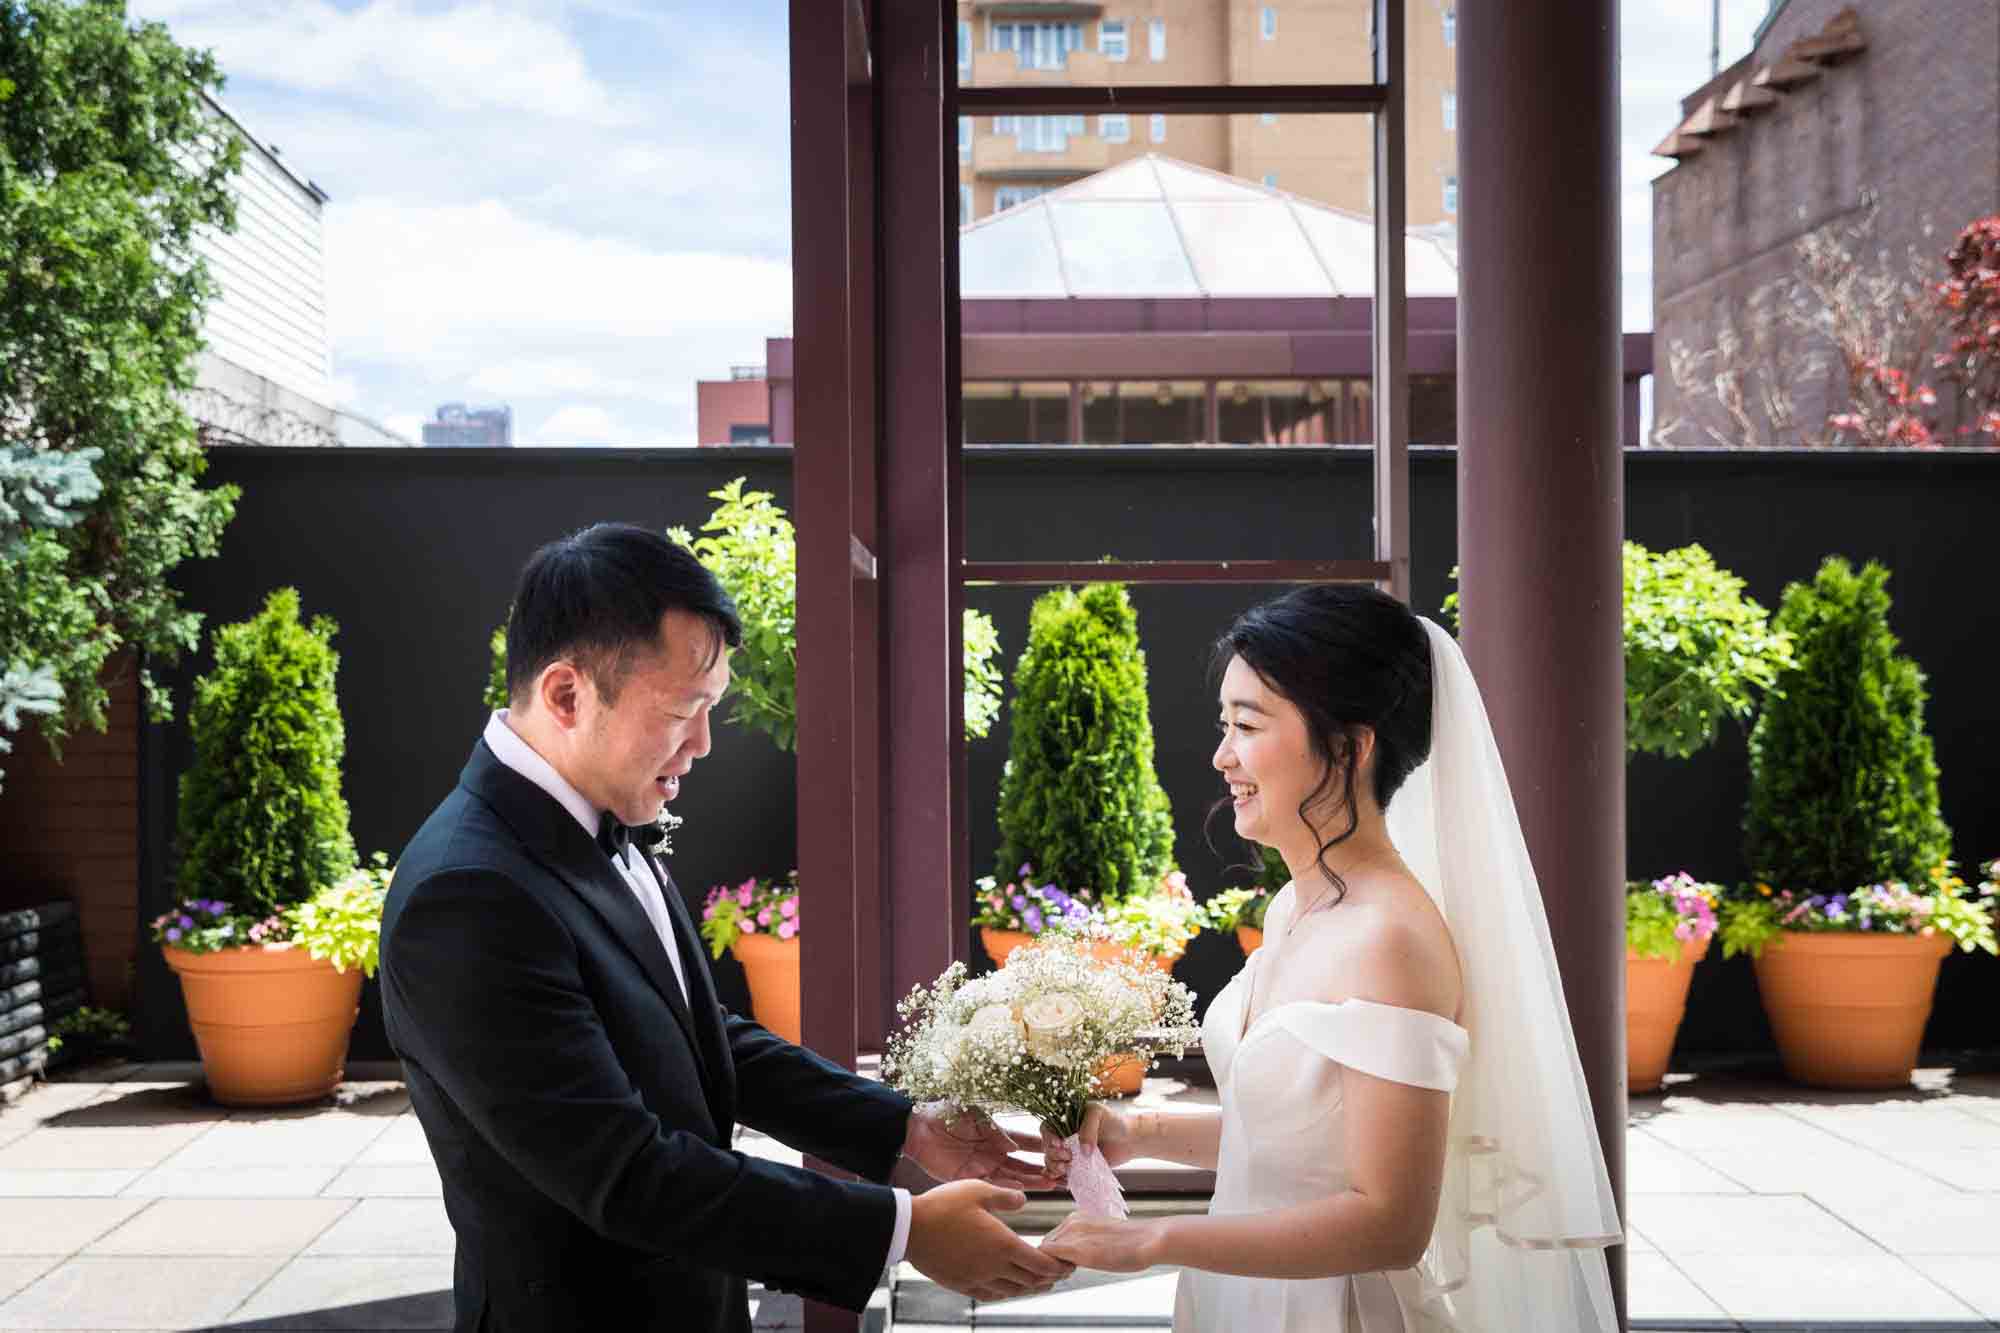 Groom seeing bride in dress for first time at a Sheraton LaGuardia East Hotel wedding